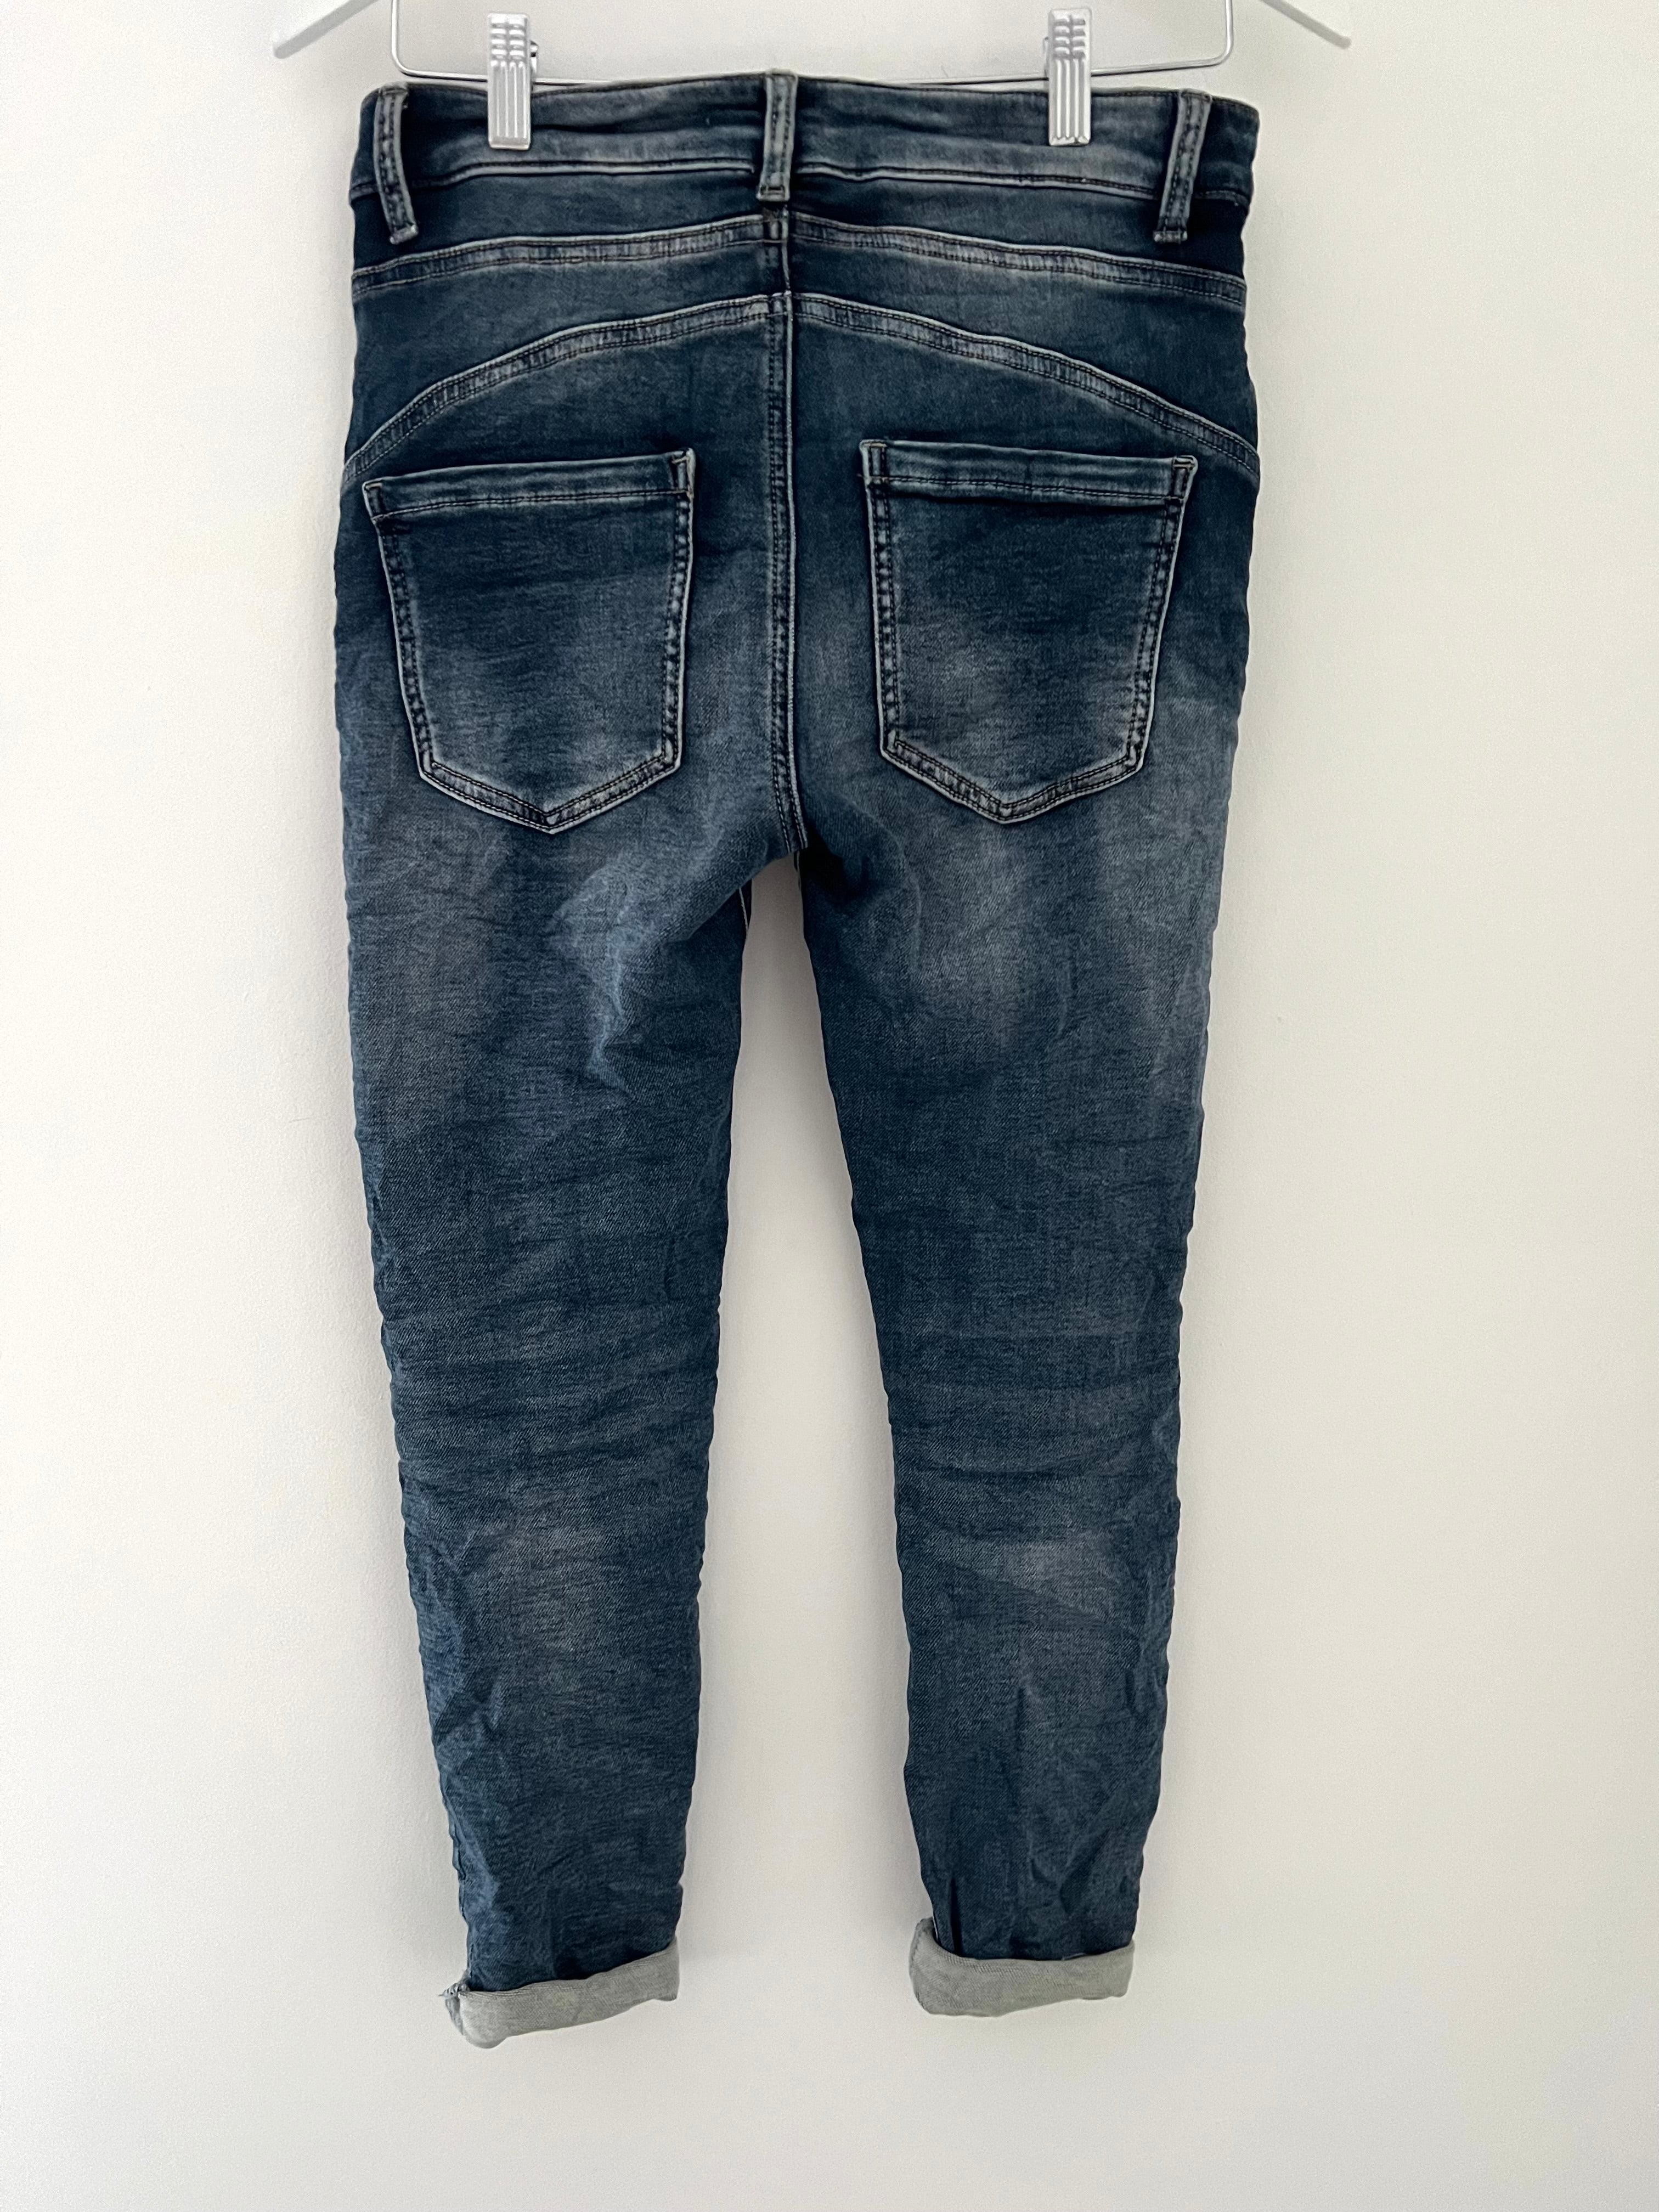 Covered Button Fly Stretch Jeans in Mid Denim